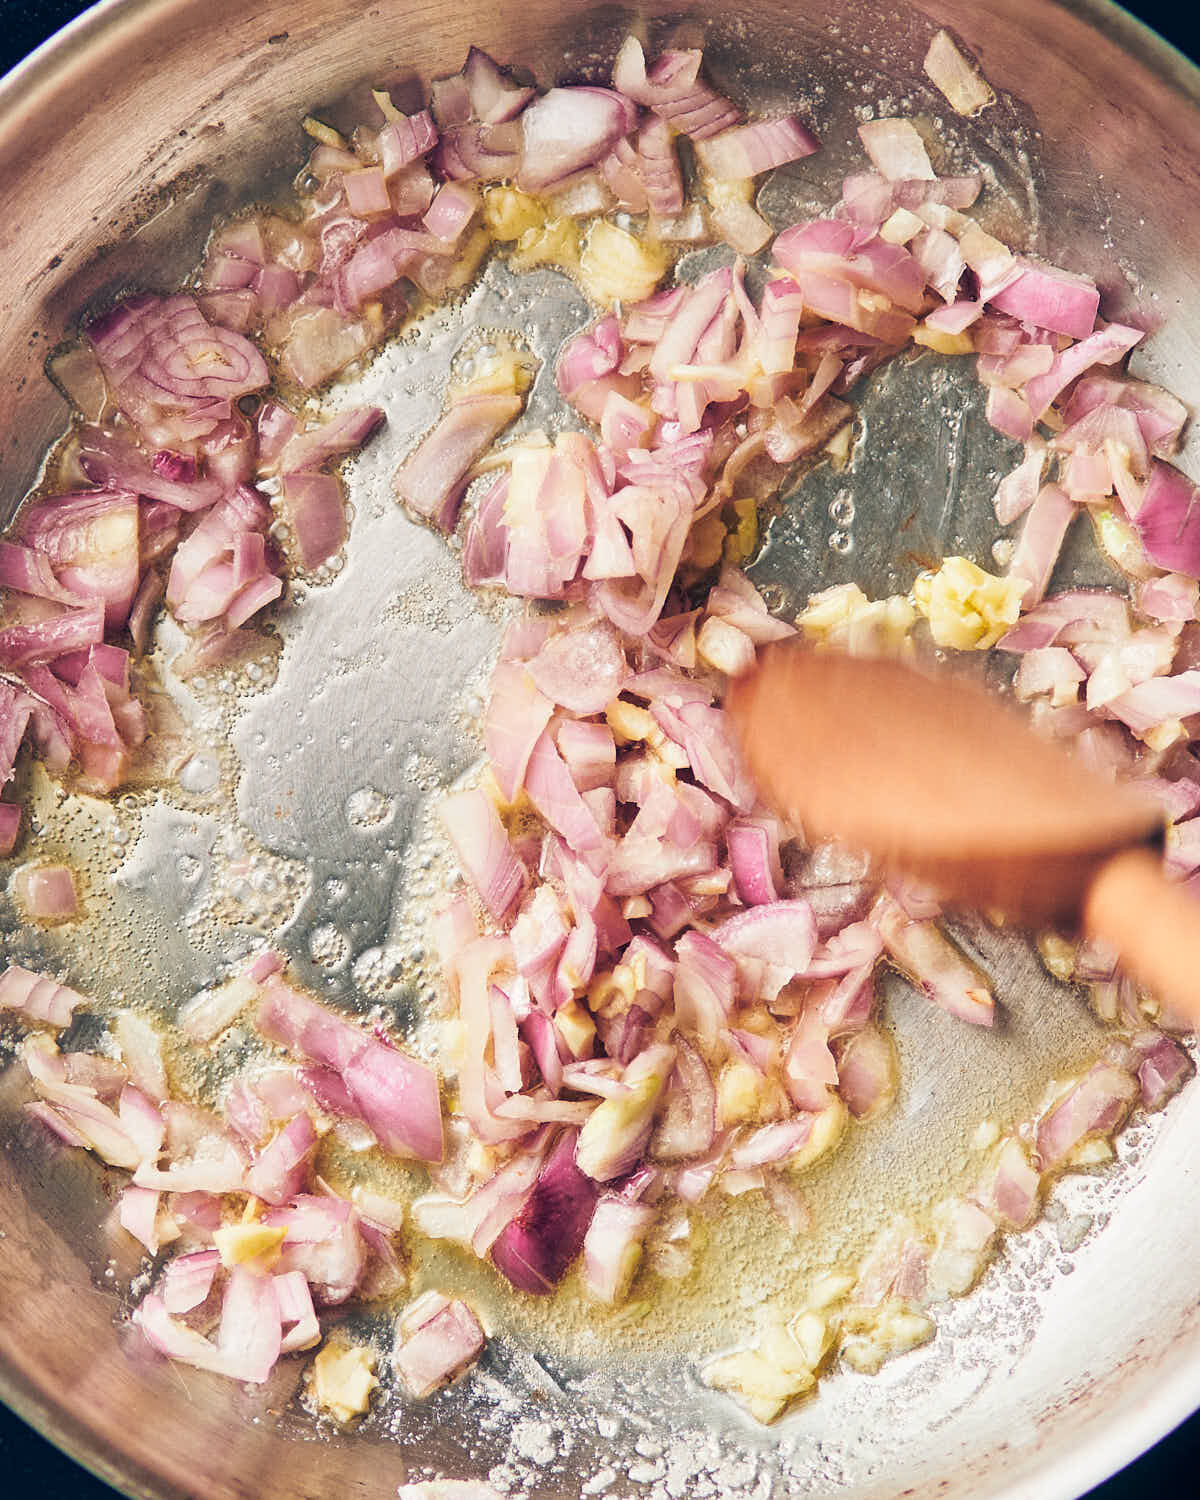 Shallots and garlic being sauteed in a skillet with olive oil.